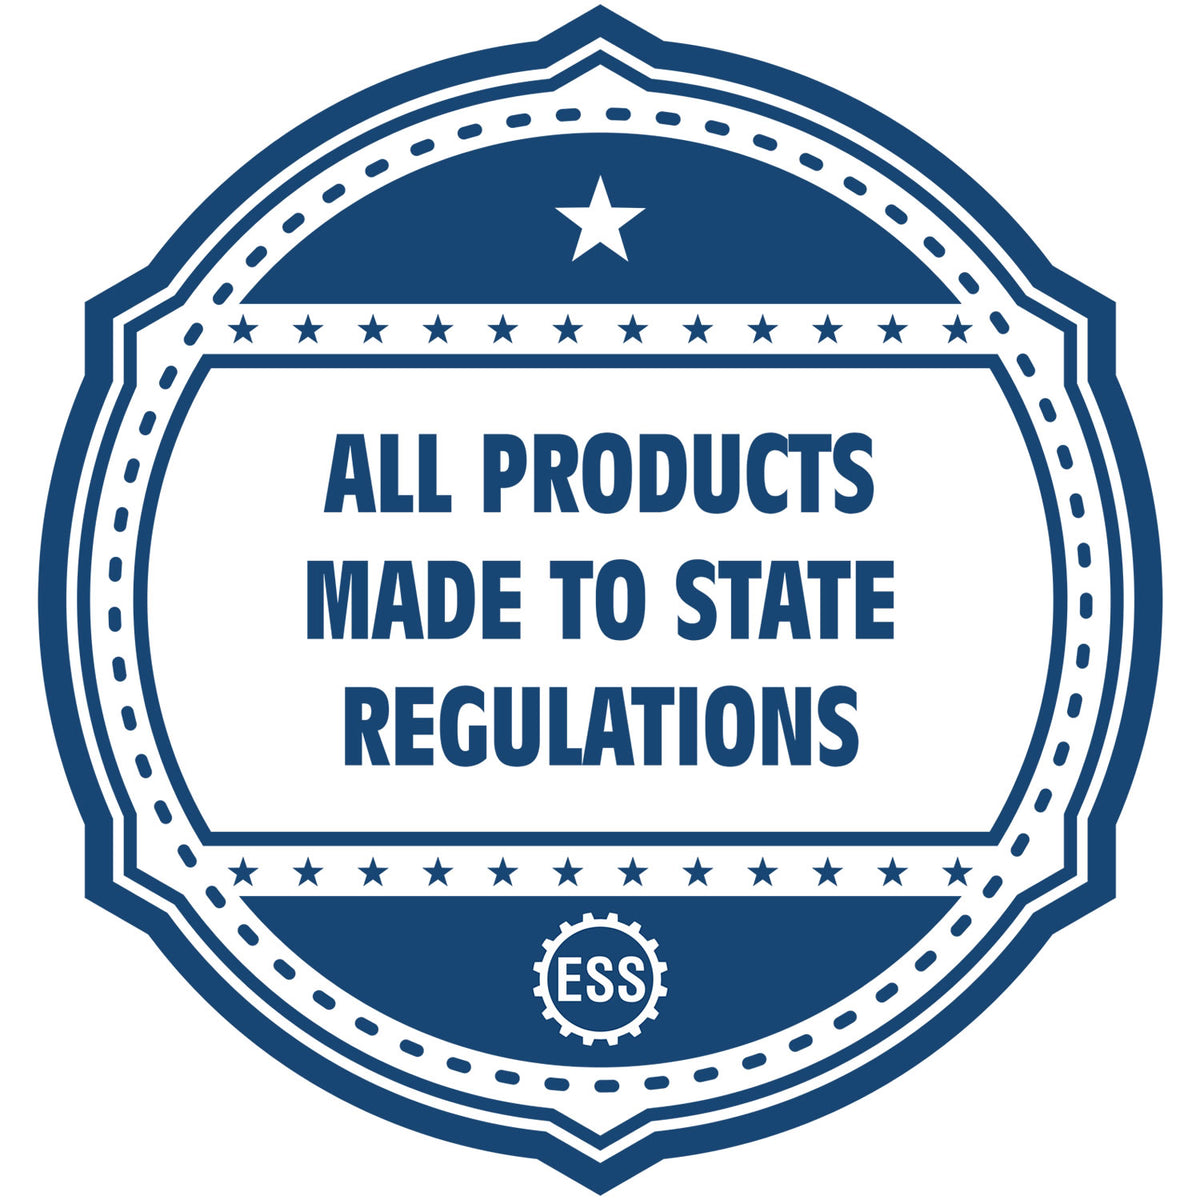 A blue icon or badge for the Idaho Professional Geologist Seal Stamp showing that this product is made in compliance with state regulations.